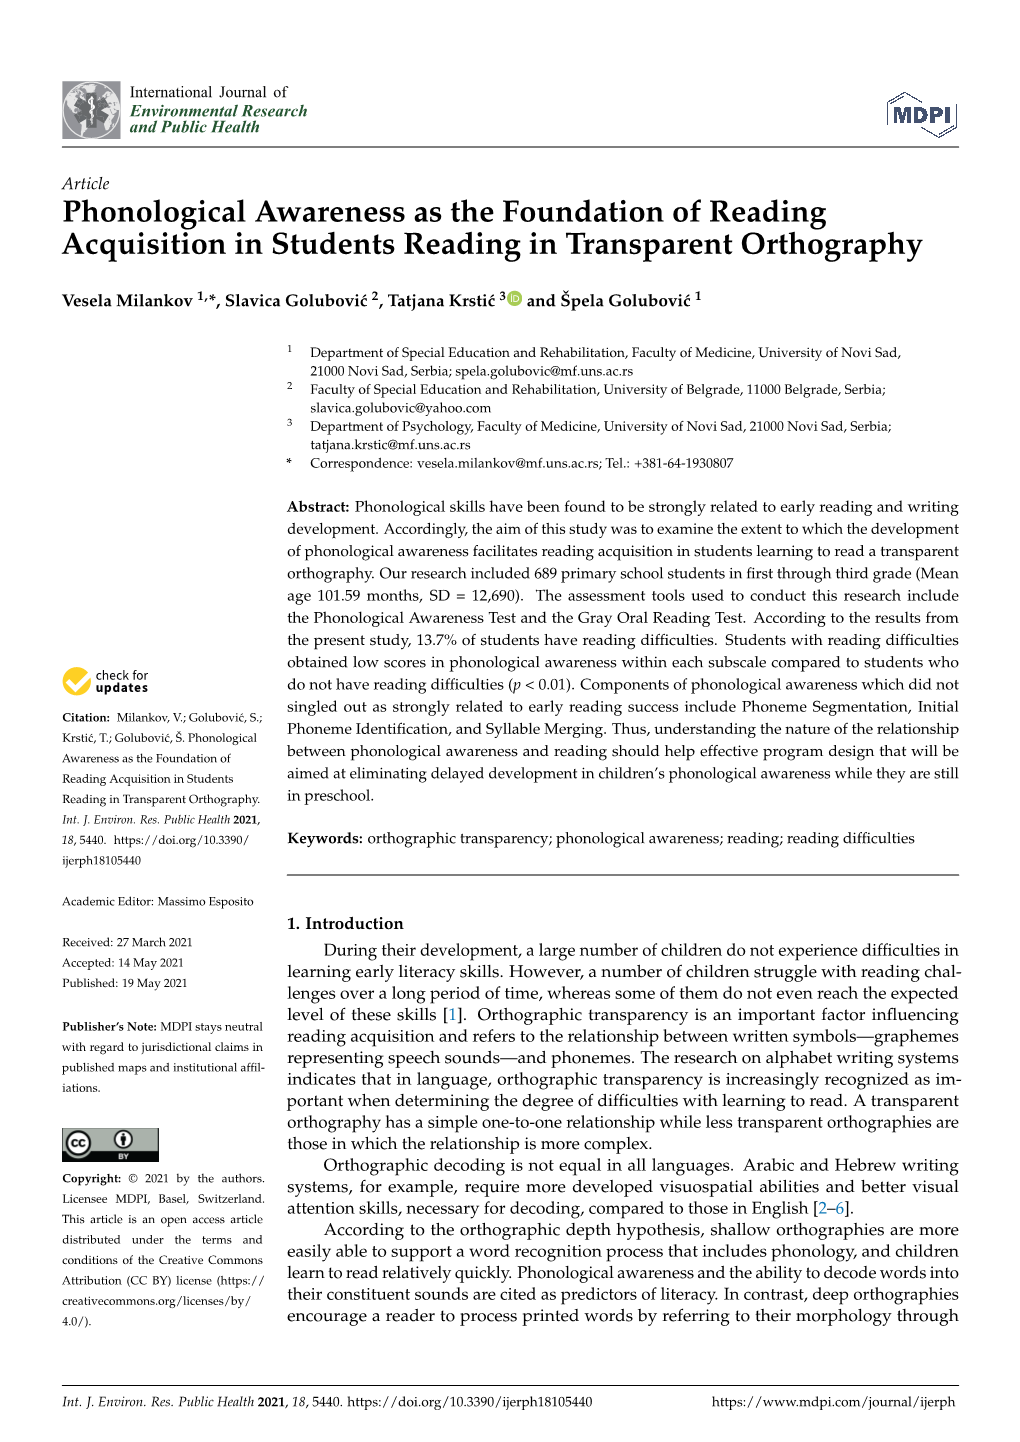 Phonological Awareness As the Foundation of Reading Acquisition in Students Reading in Transparent Orthography